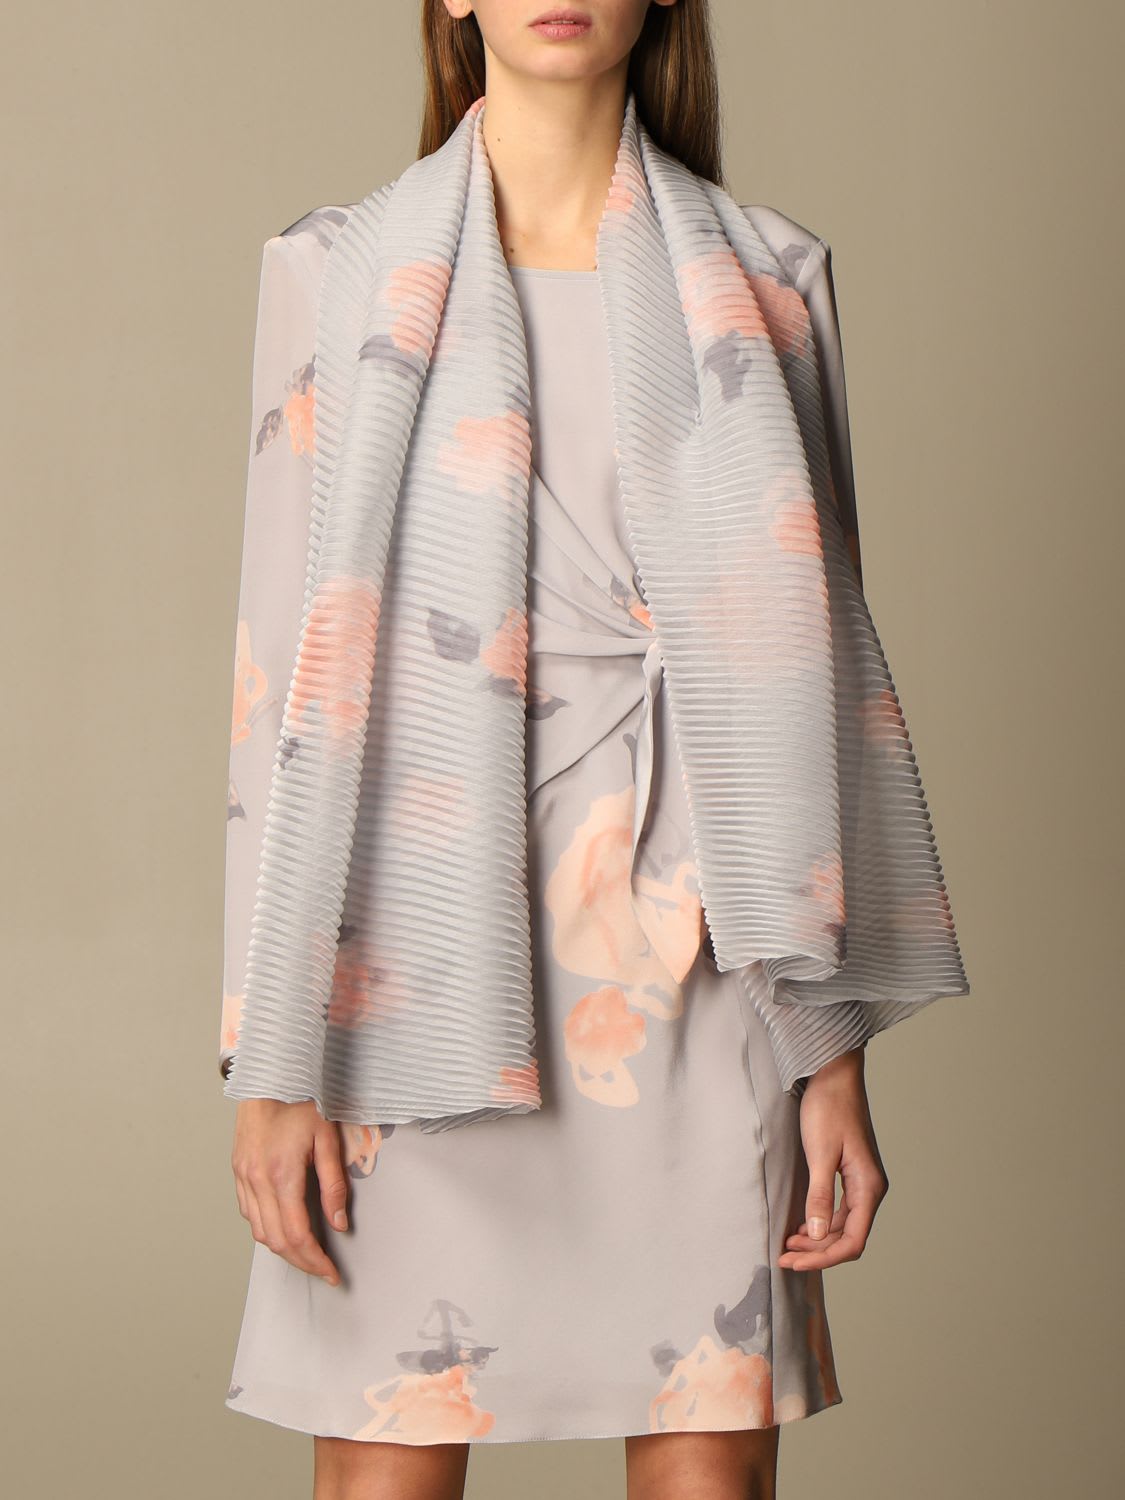 EMPORIO ARMANI PLEATED FOULARD WITH FLORAL PATTERN,635249 1P323 11417